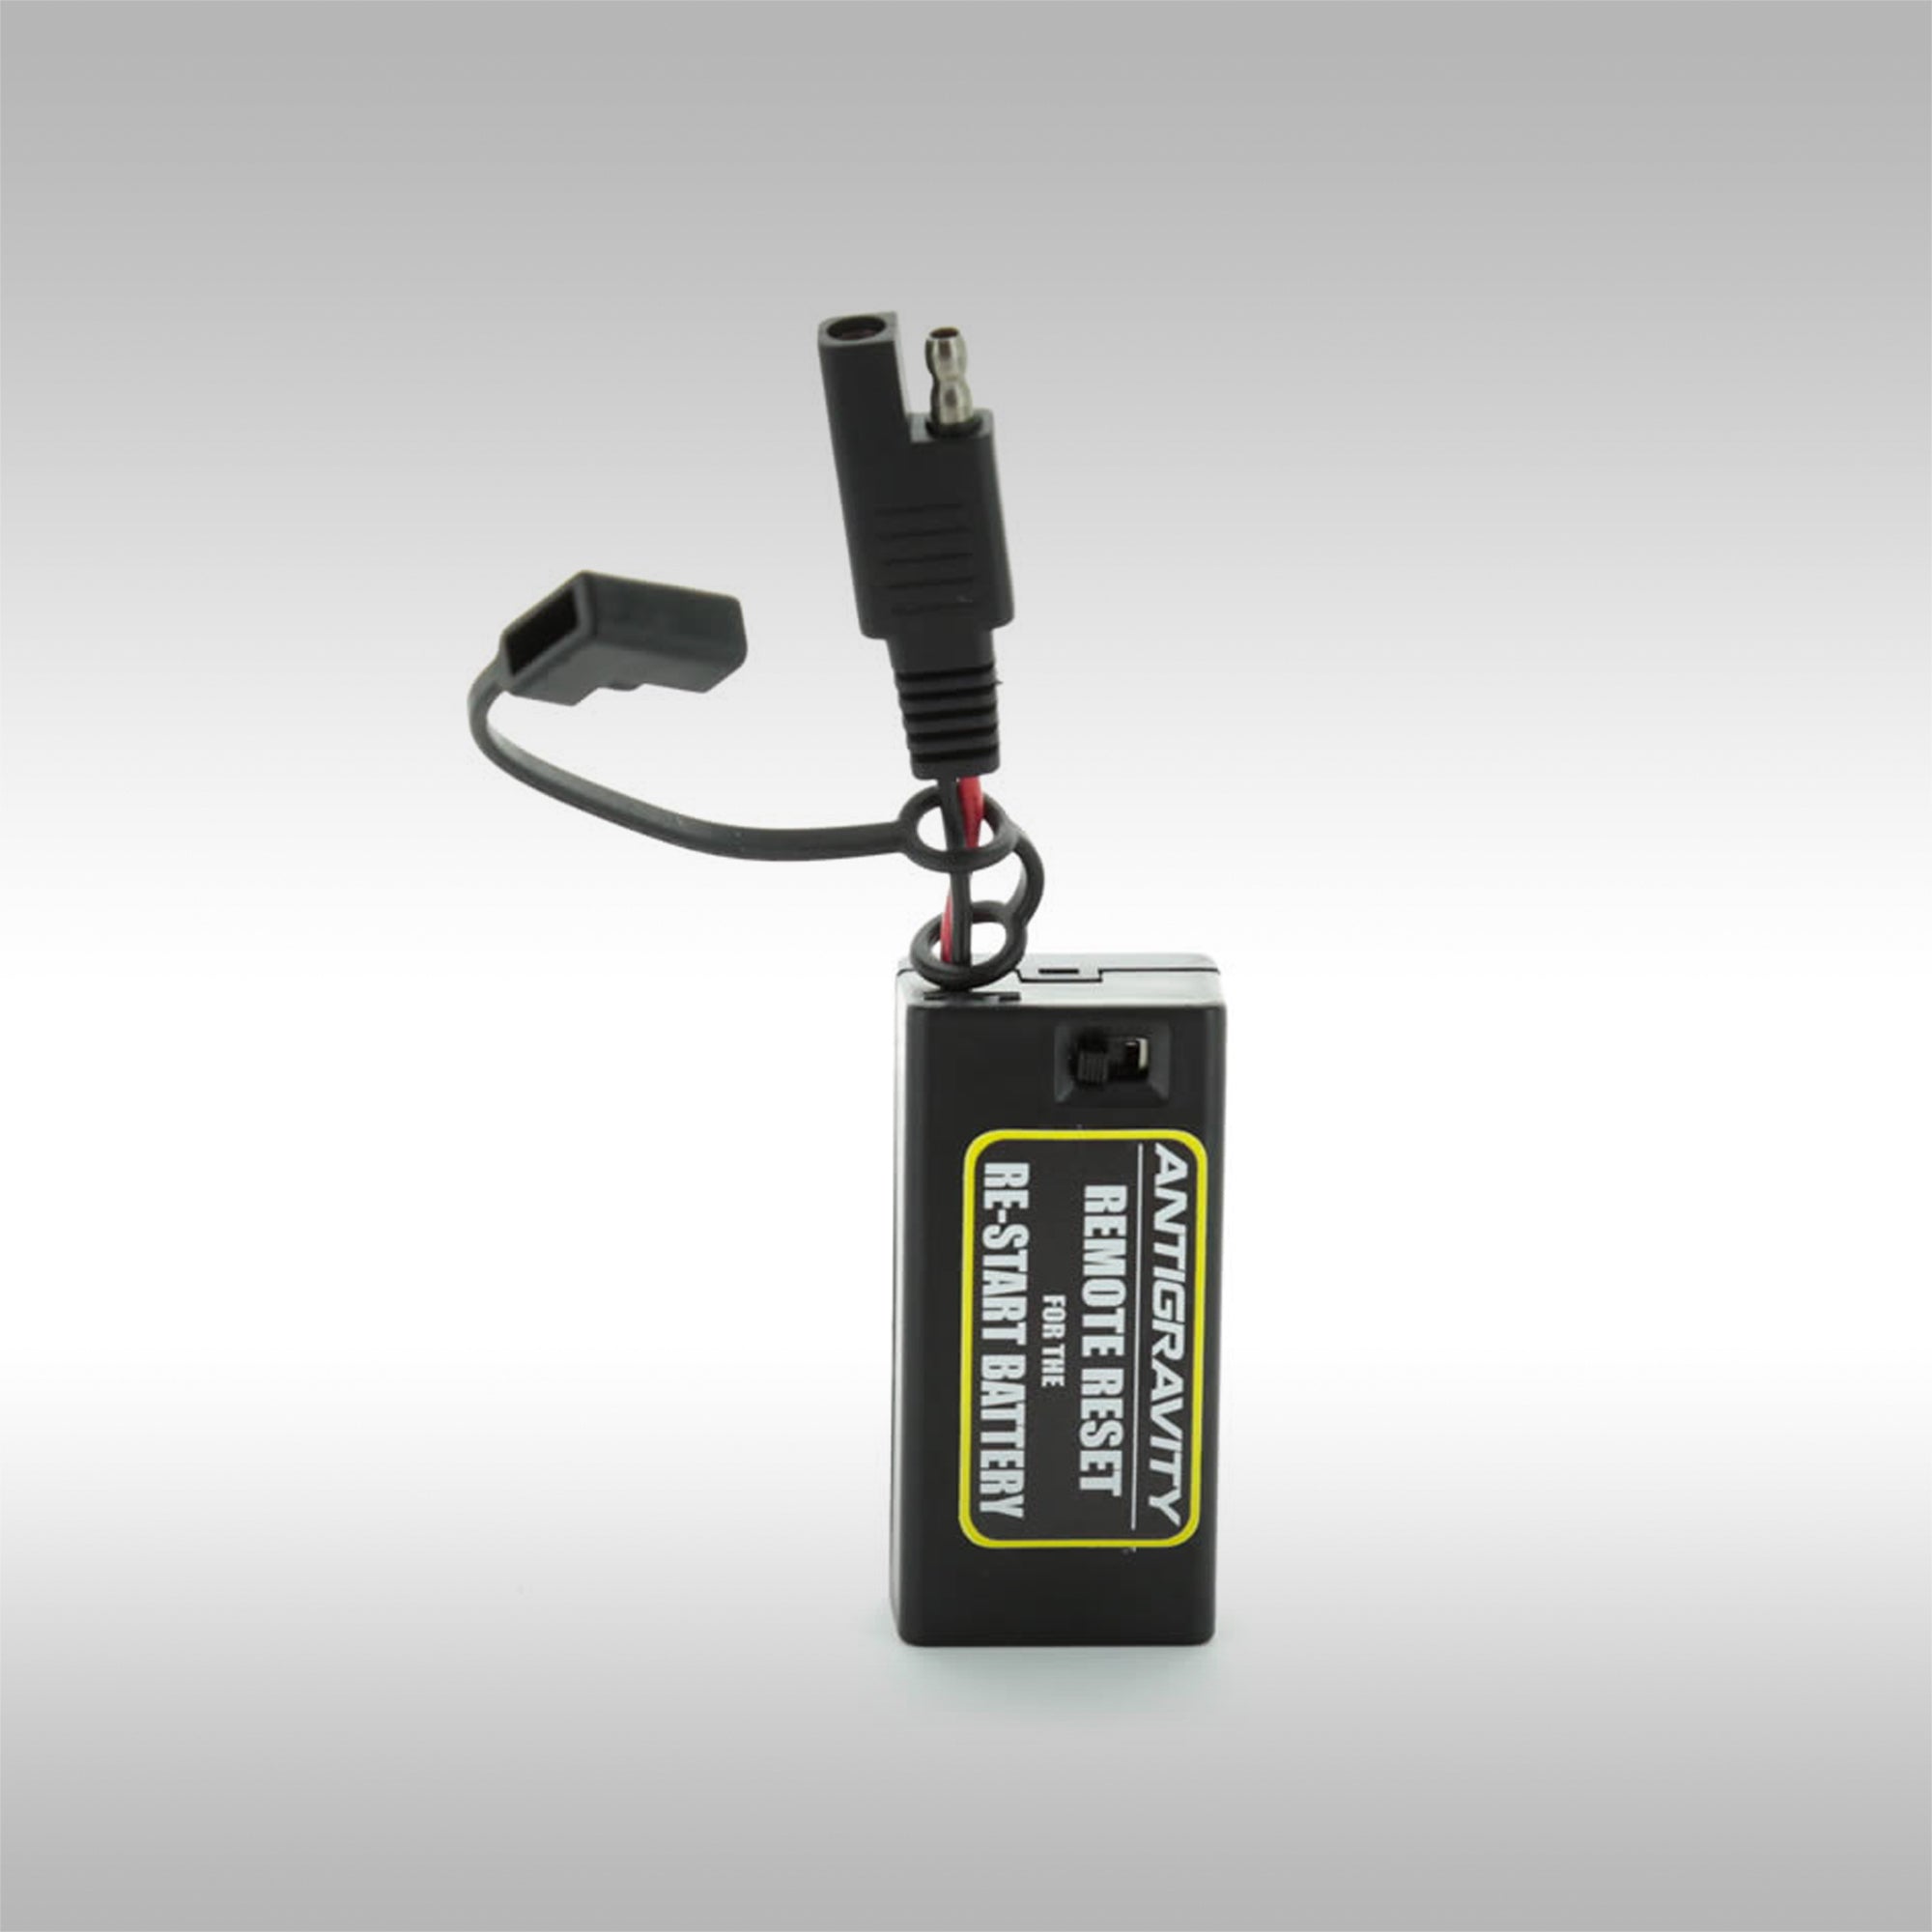 The Antigravity Re-Start Battery Remote. Plug this dongle into the SAE charging cable attached to your bike and activate your re-start battery without taking your seat off. Antigravity lithium motorcycle battery.